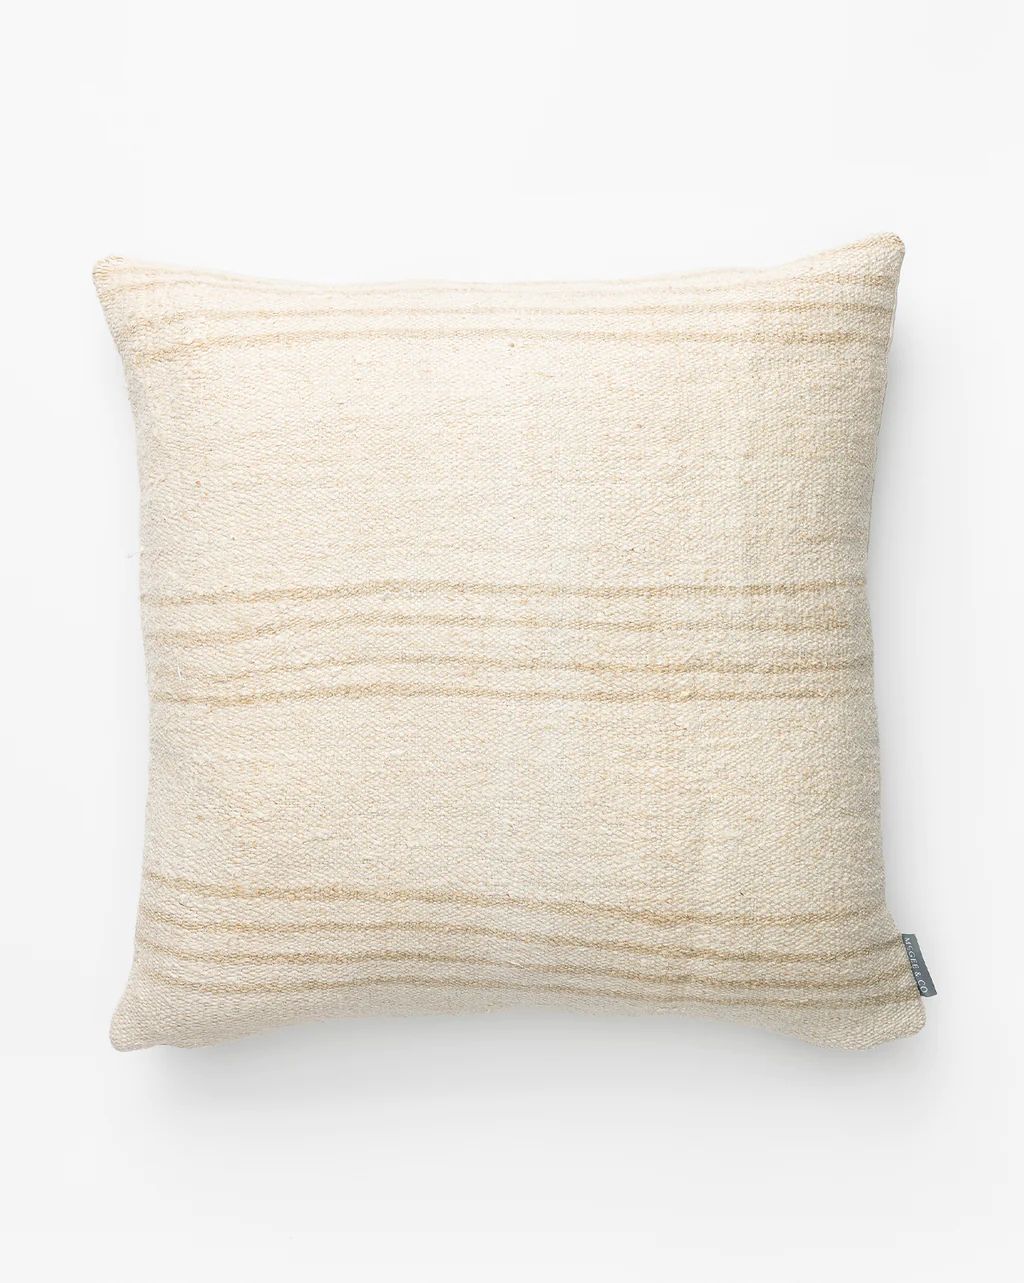 Textured Stripe Vintage Pillow Cover No. 5 | McGee & Co.